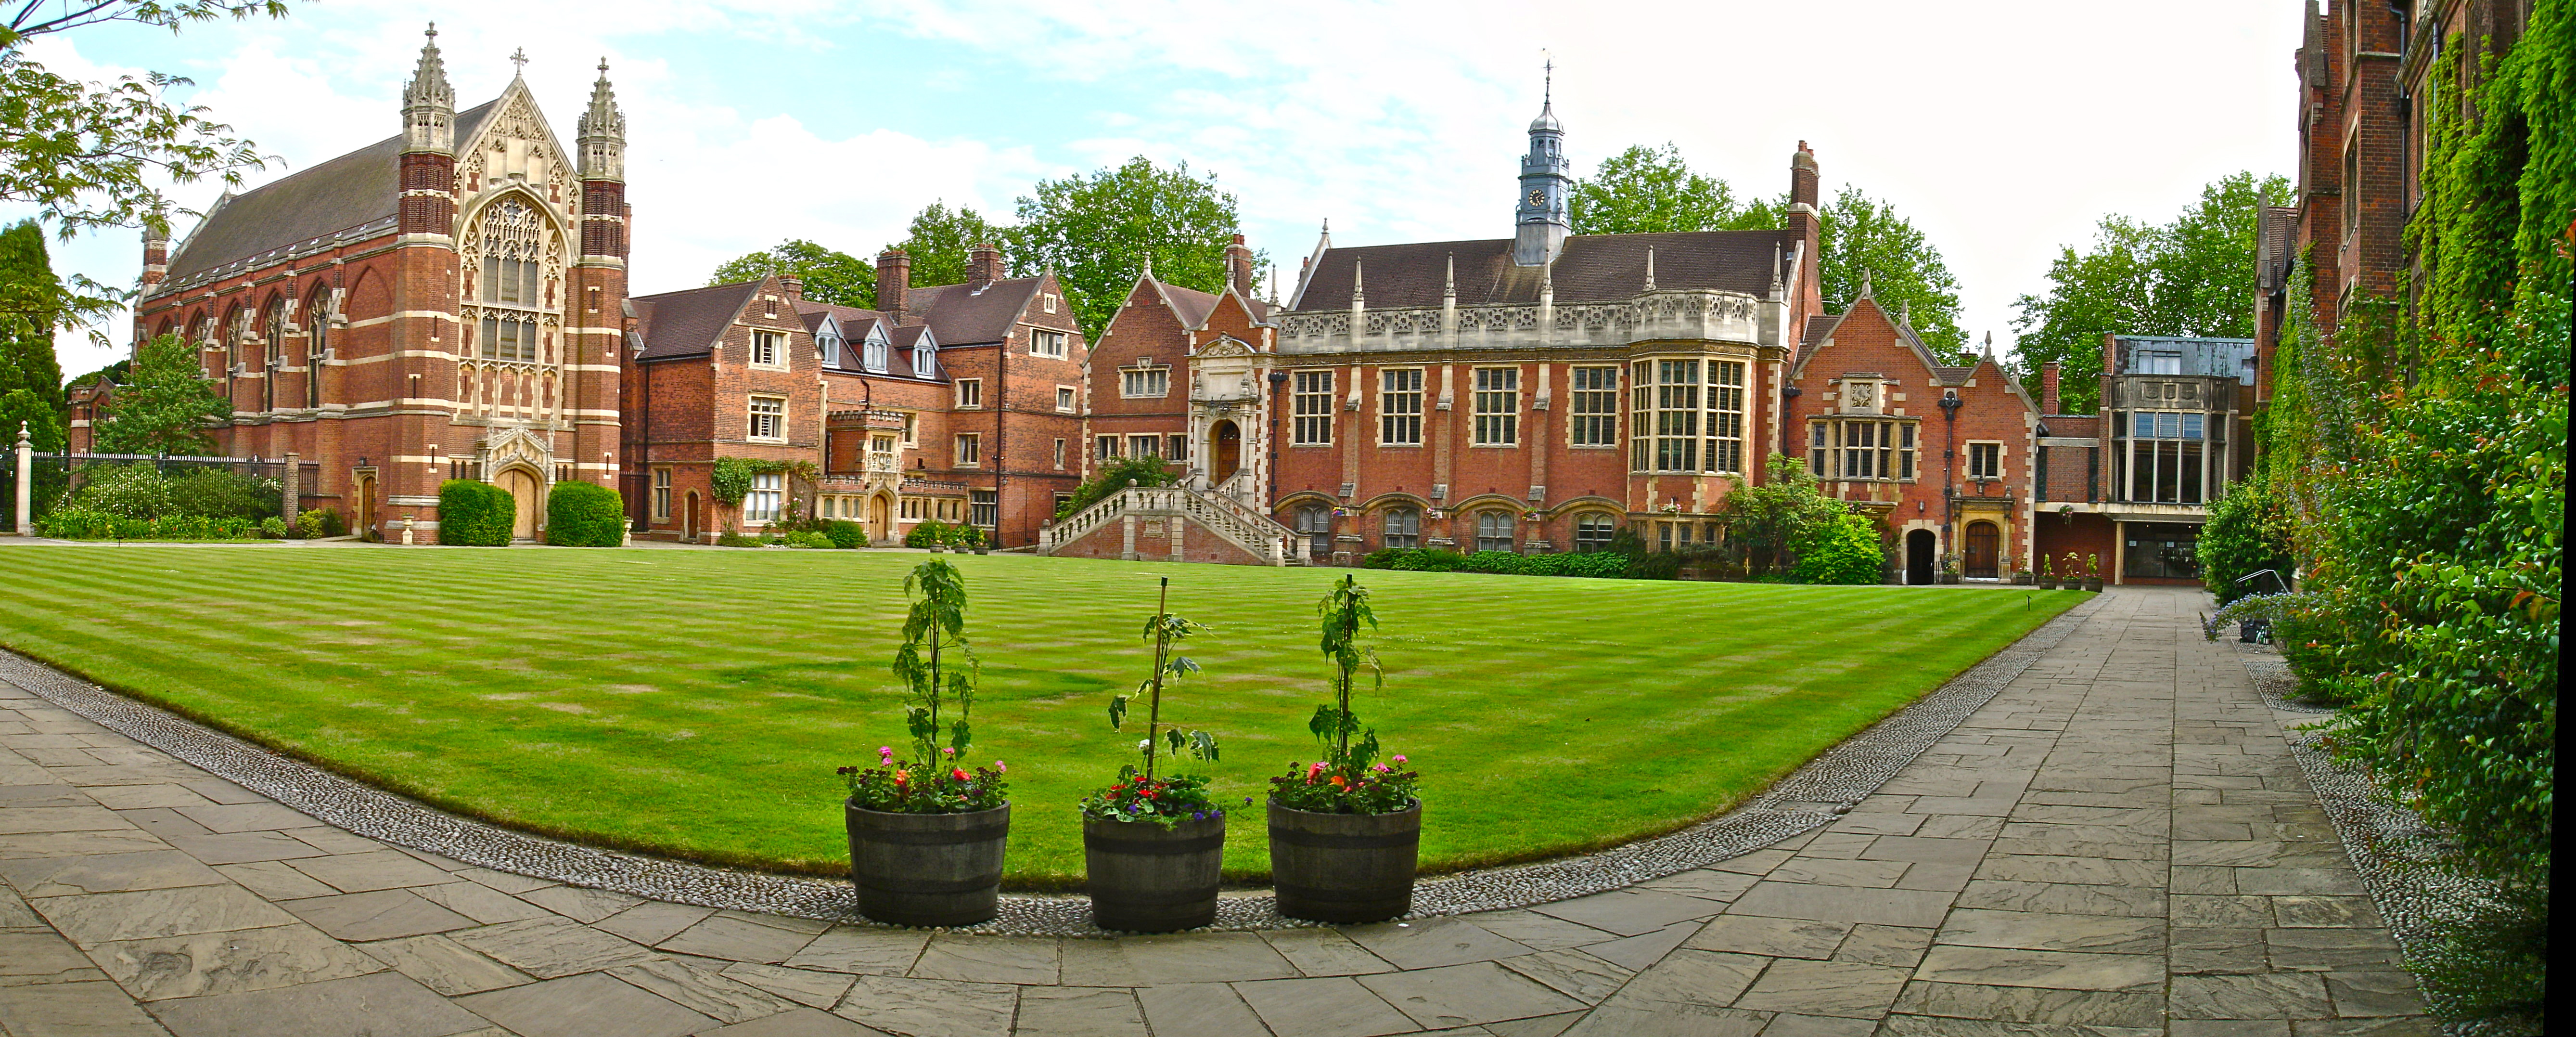 Selwyn_College_Old_Court_Panorama_from_North-West_corner.jpg